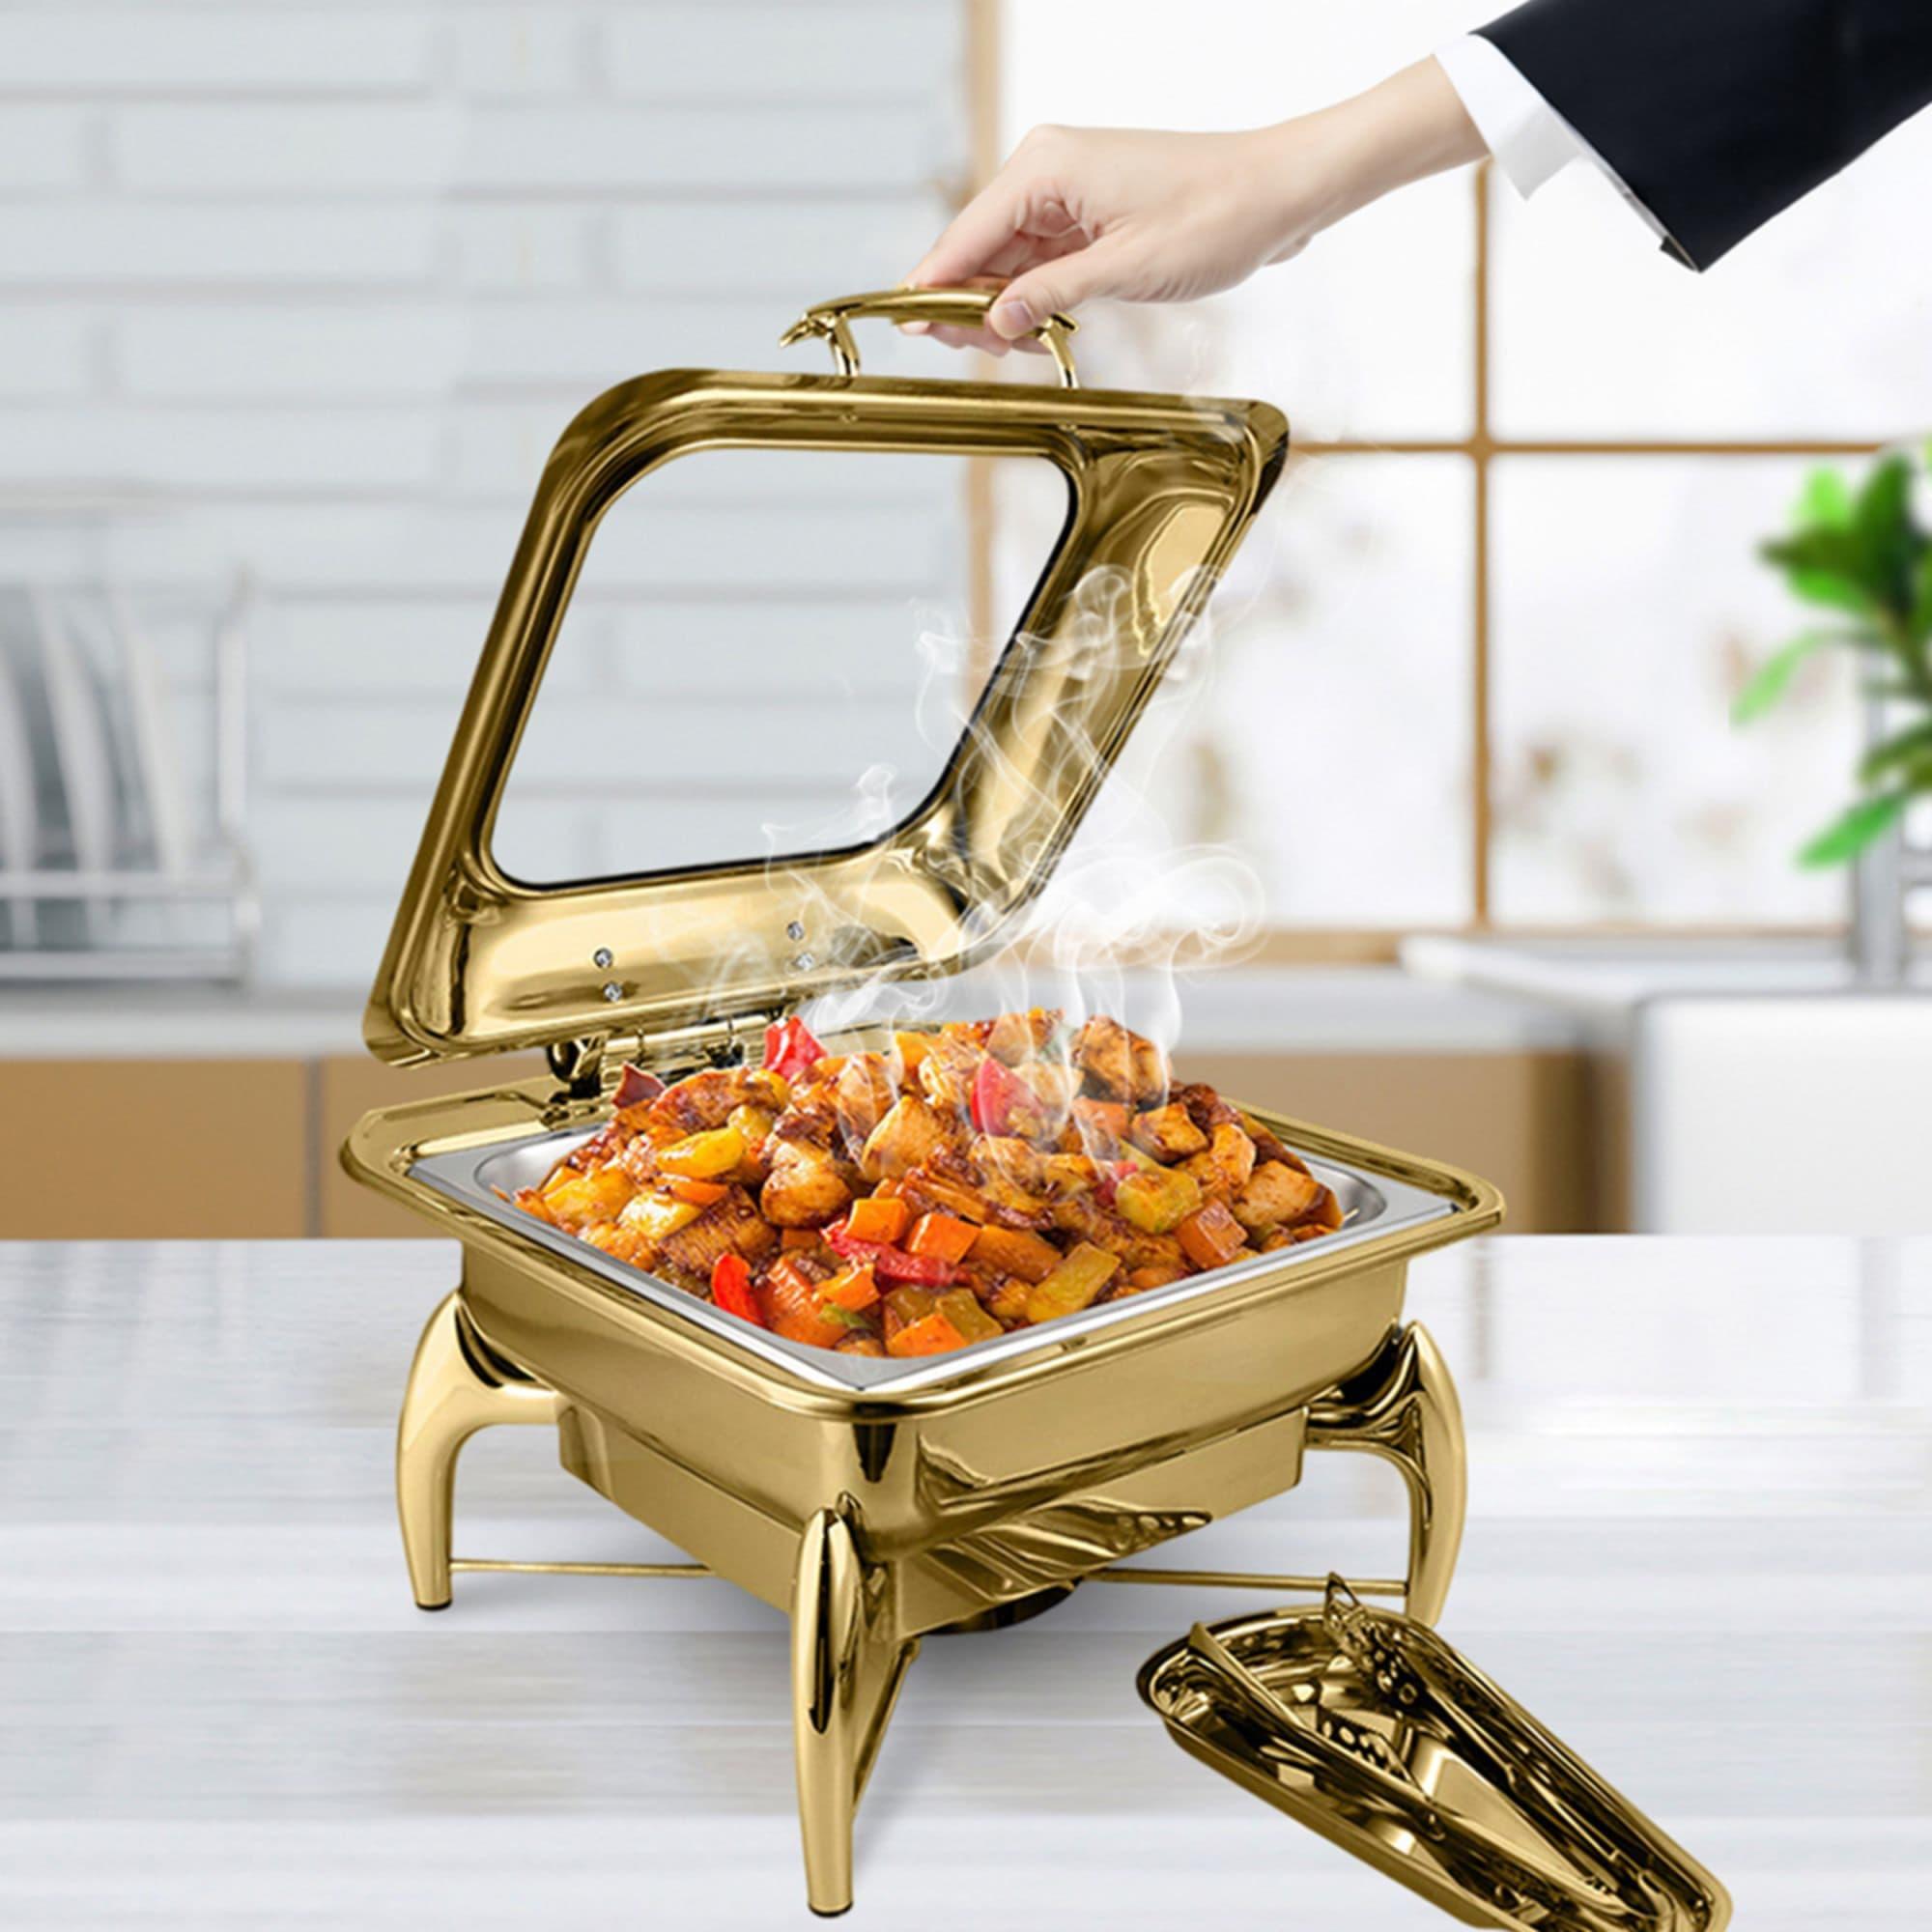 Soga Square Stainless Steel Chafing Dish with Top Lid Gold Image 4